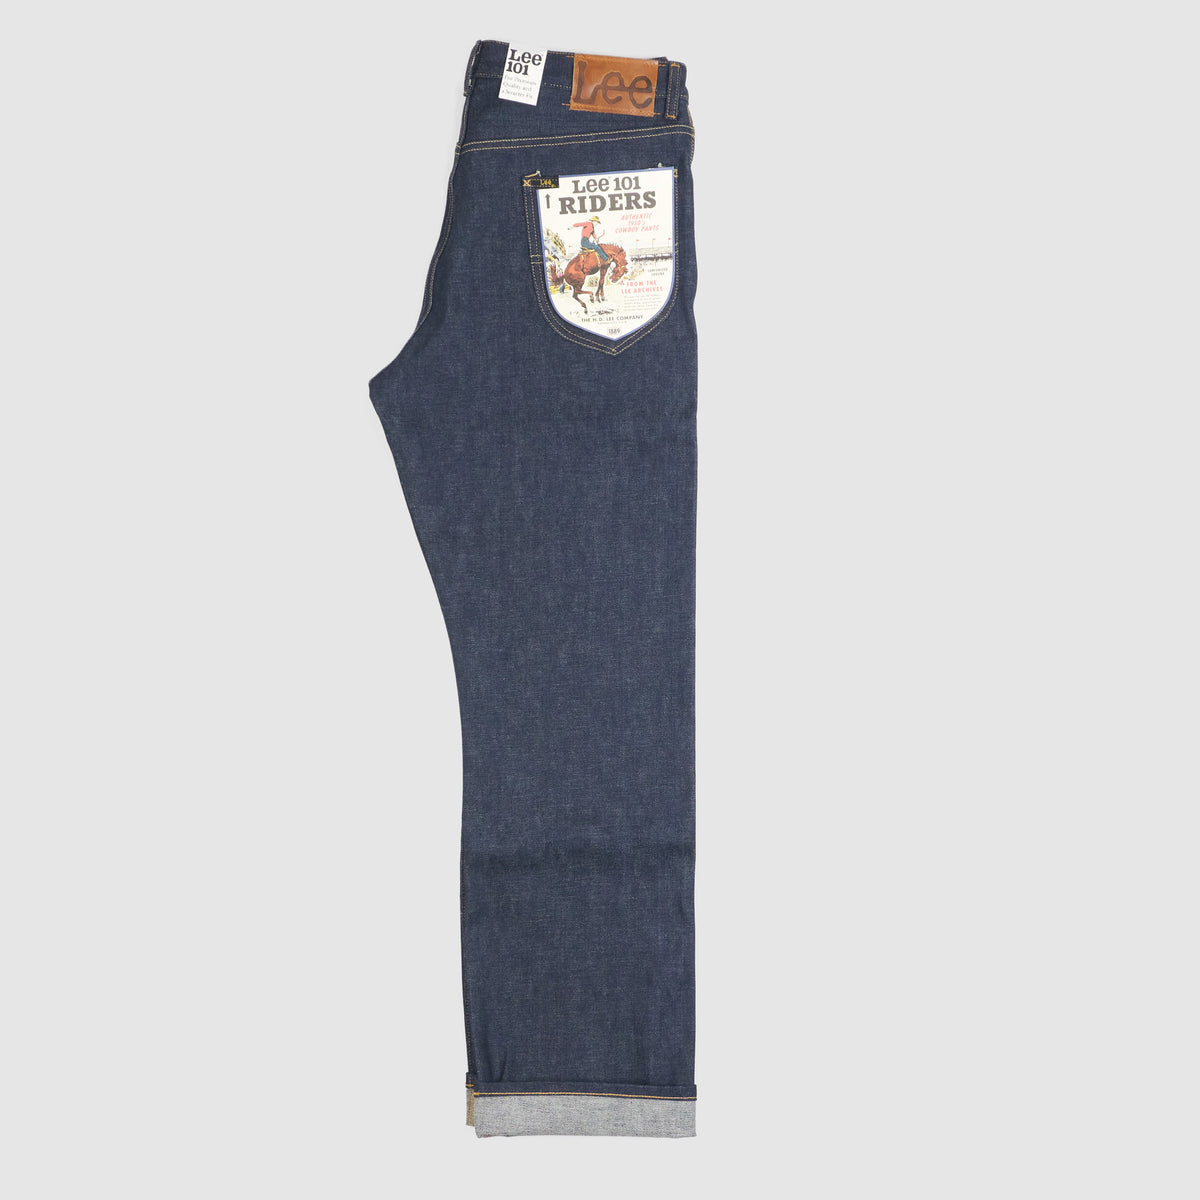 Lee 101 50s Rider Jeans